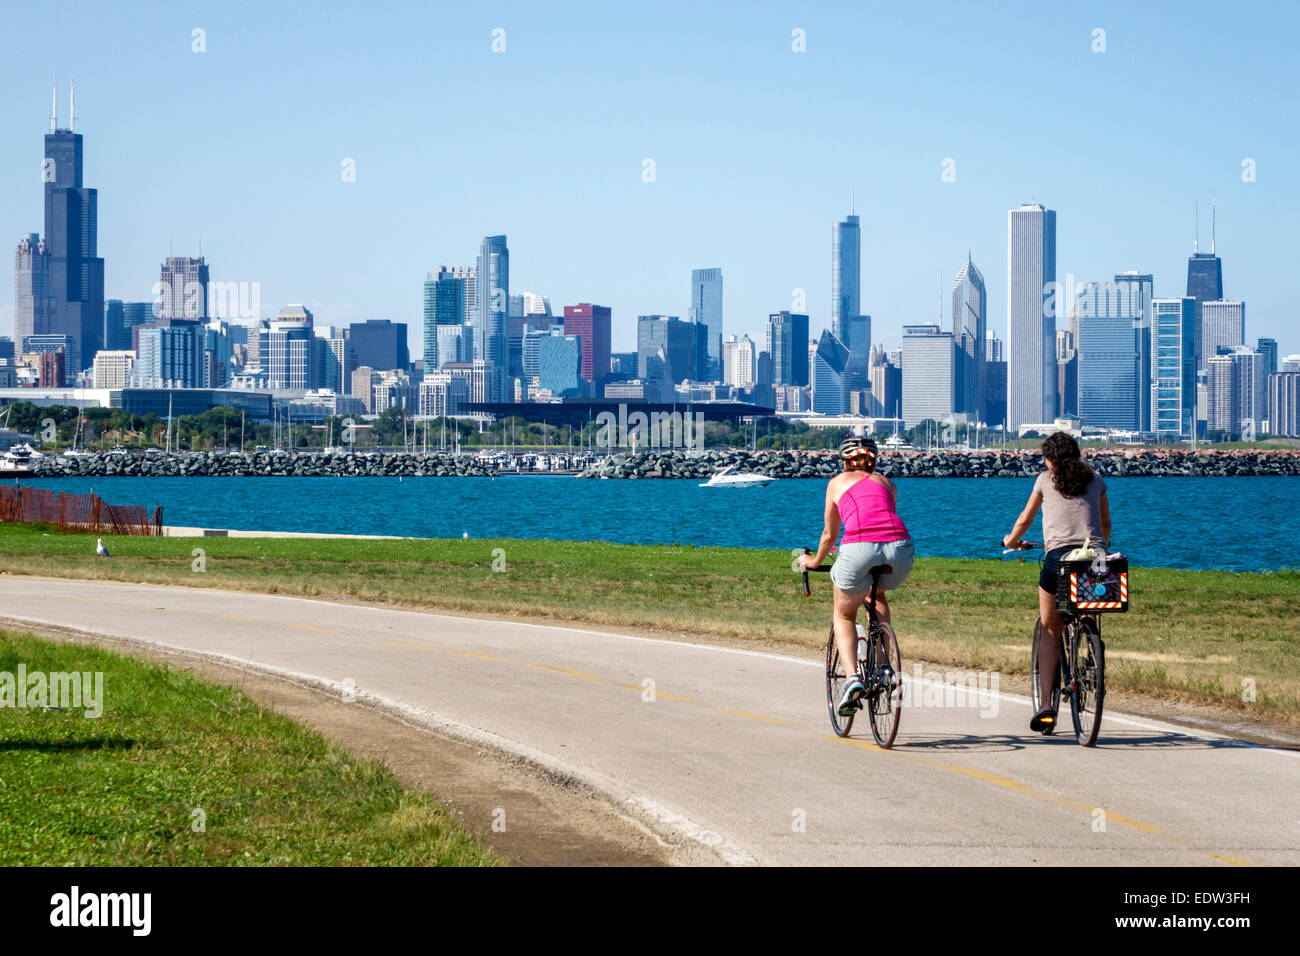 Chicago Illinois,South Side,Lake Michigan,39th Street Beach,Lakefront Trail,femme femme femme femme femme,amis,bicyclette vélo vélo vélo vélo vélo Banque D'Images